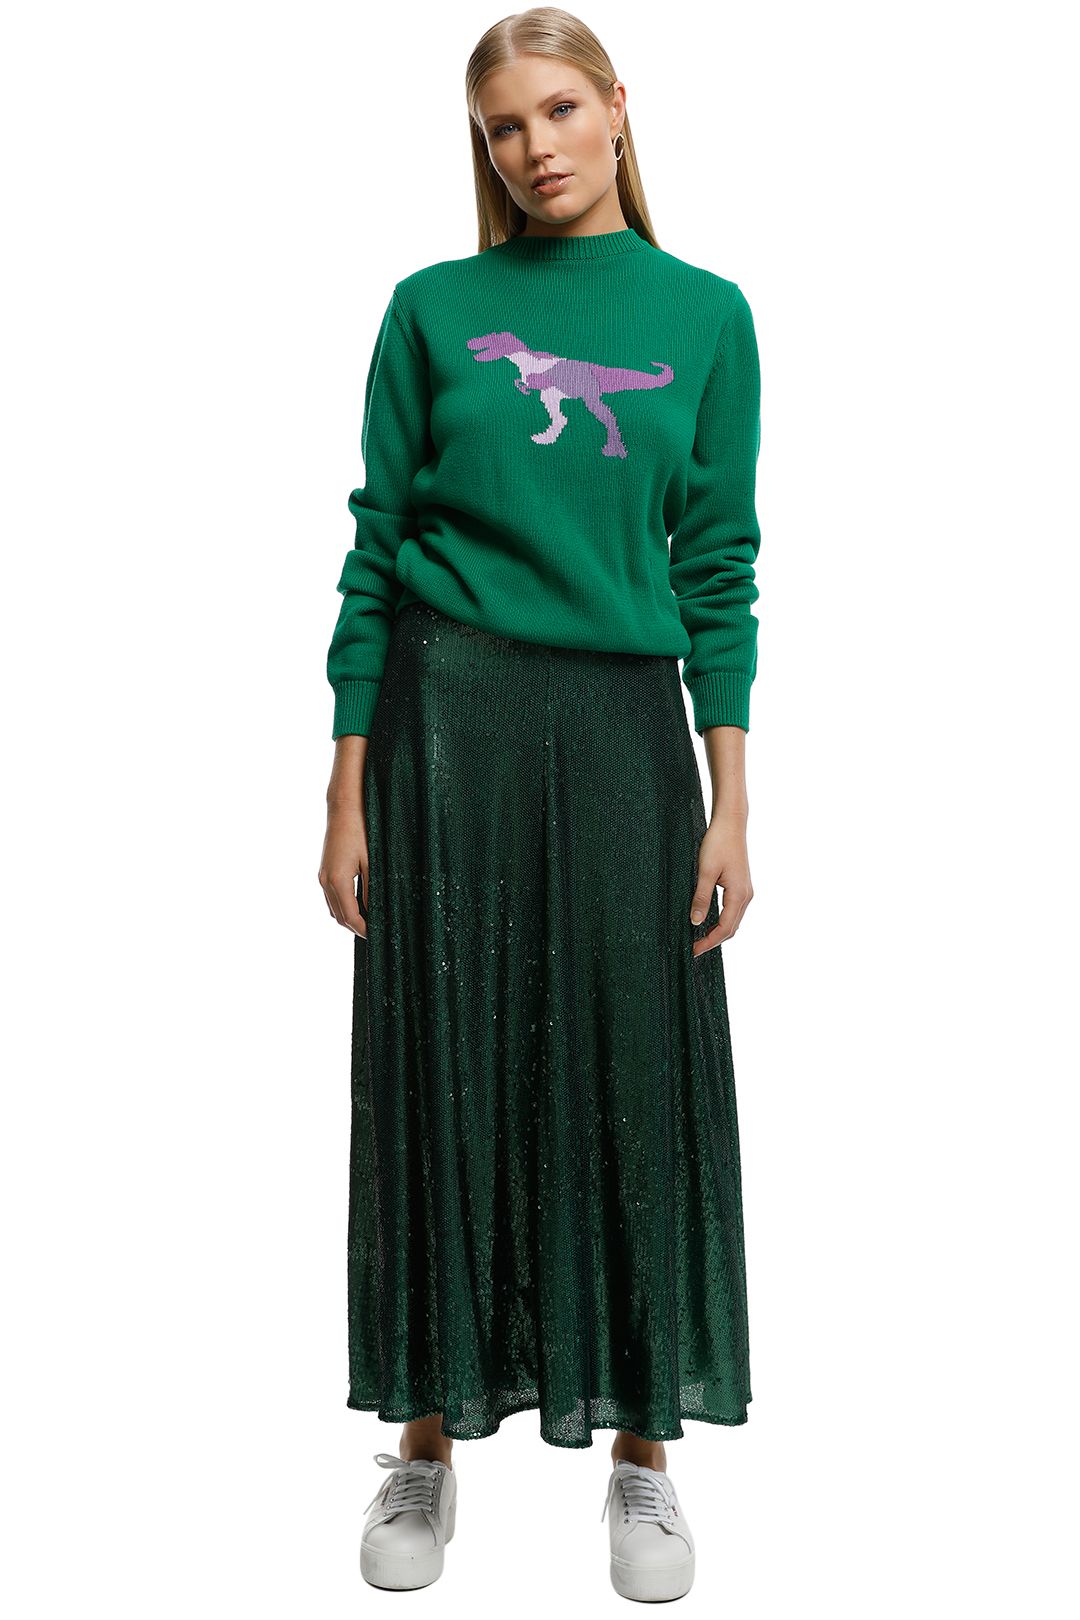 Kate-Sylvester-T-Rex-Sweater-Green-Front